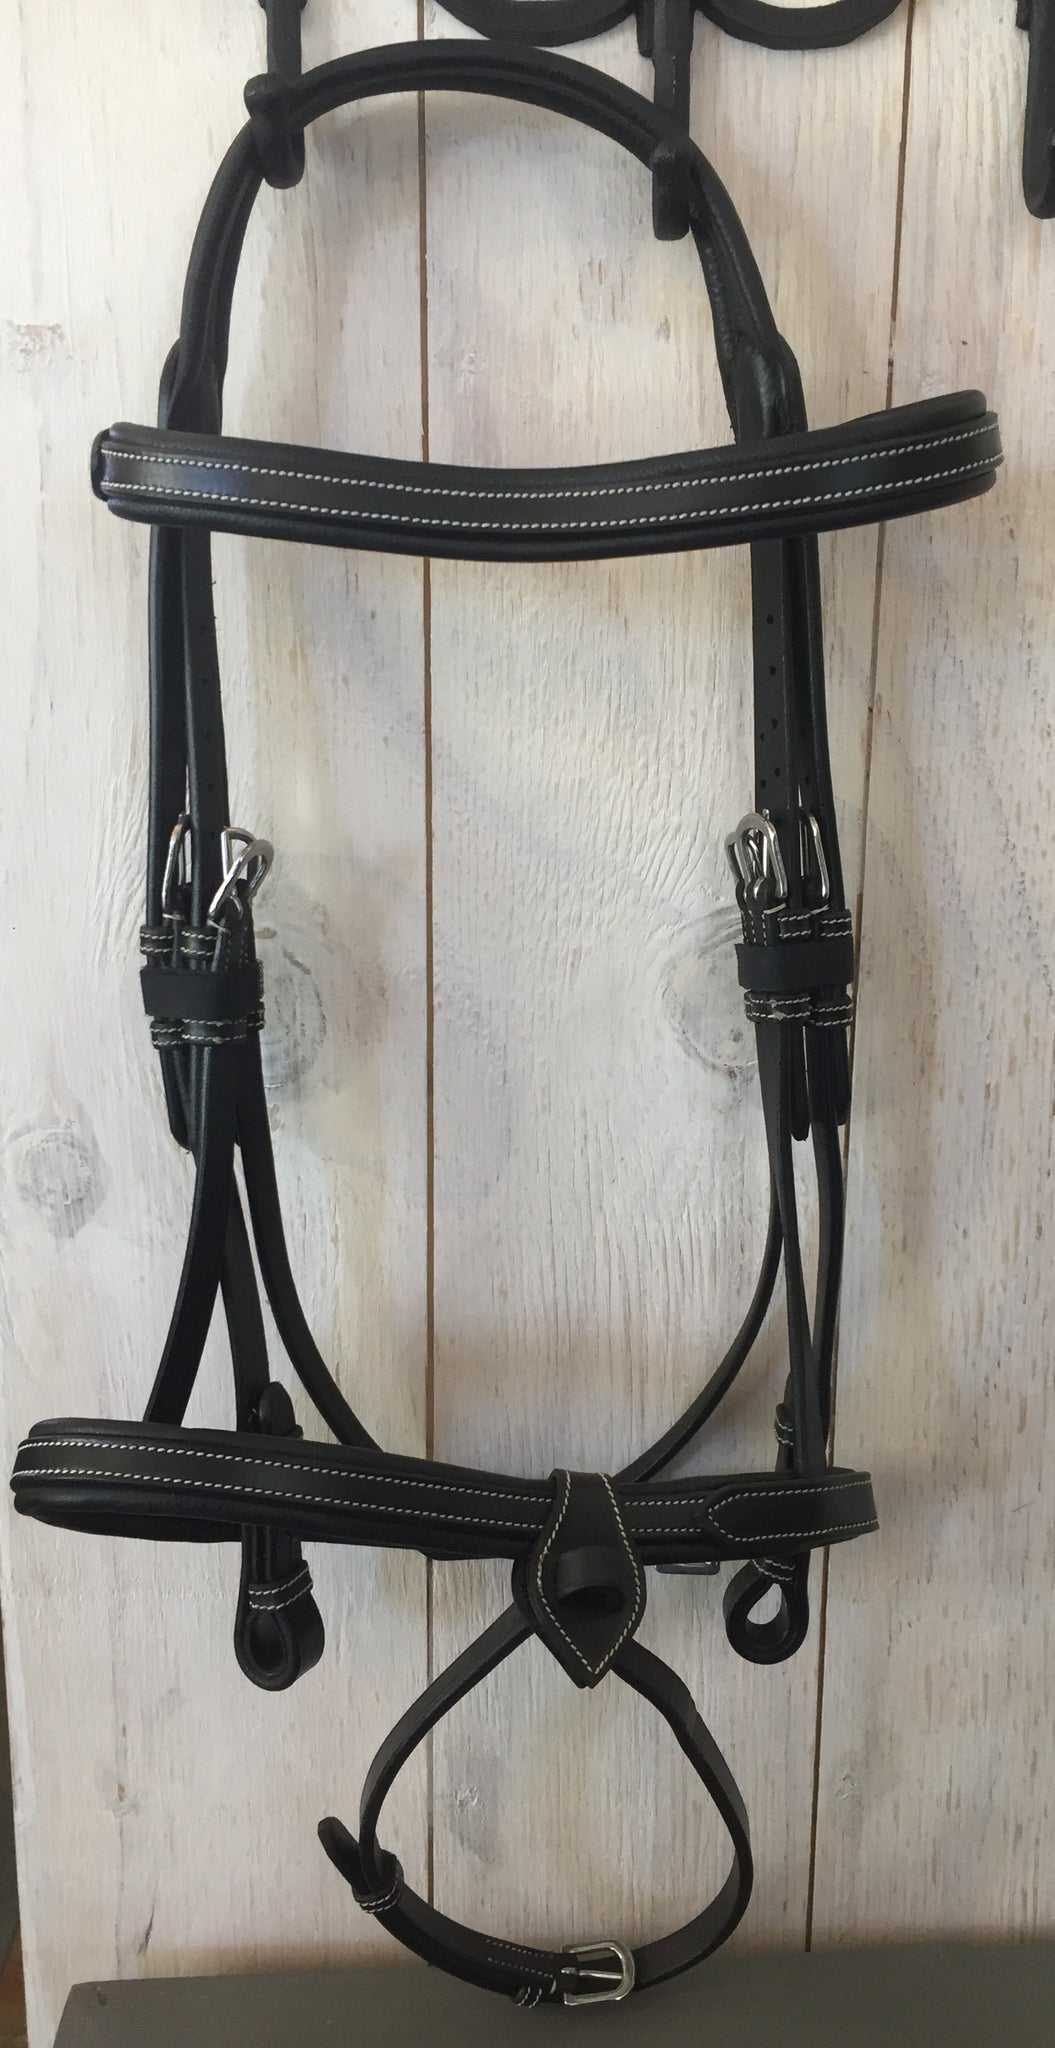 Black Padded Patent Leather Removable Flash Bridle